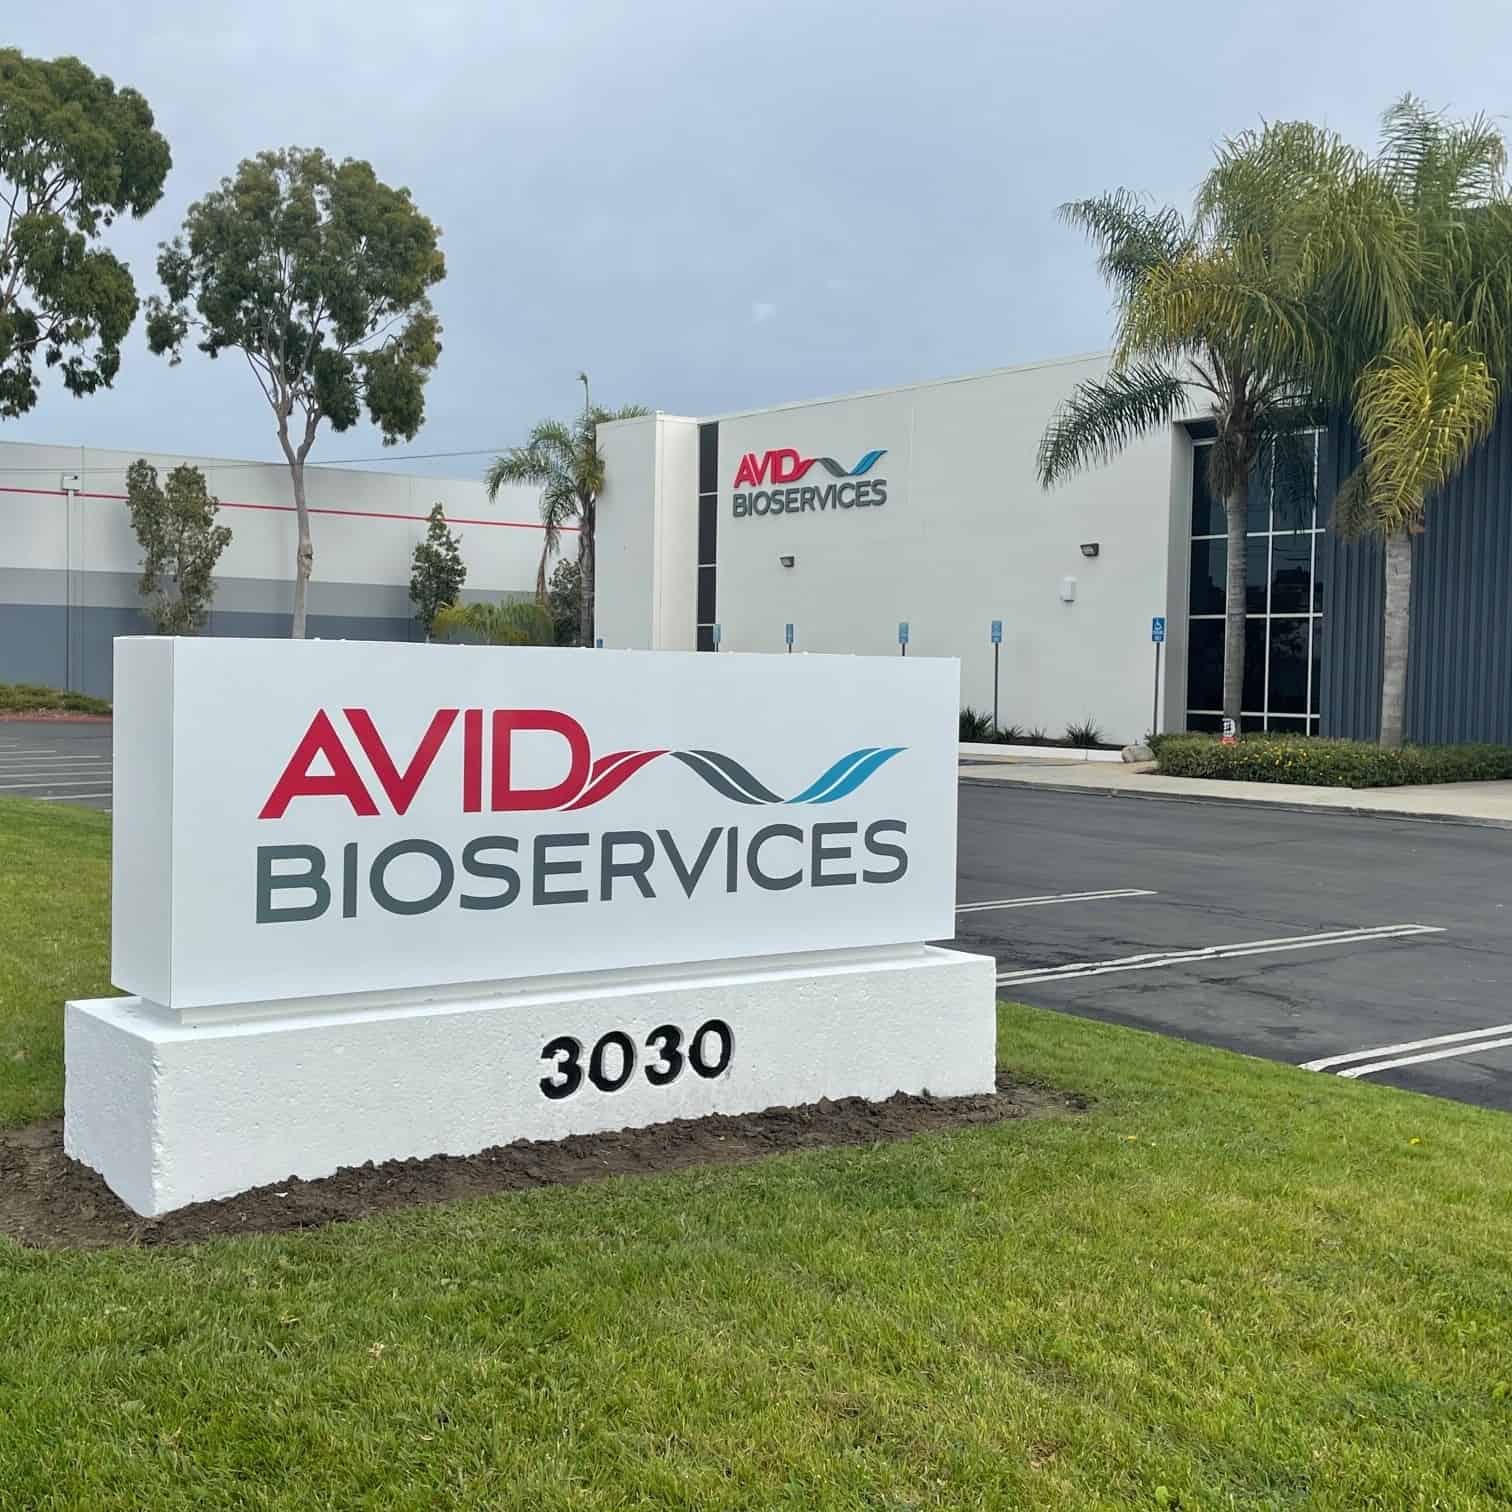 An external image of the Avid Bioservices viral vector manufacturing facility in California, USA